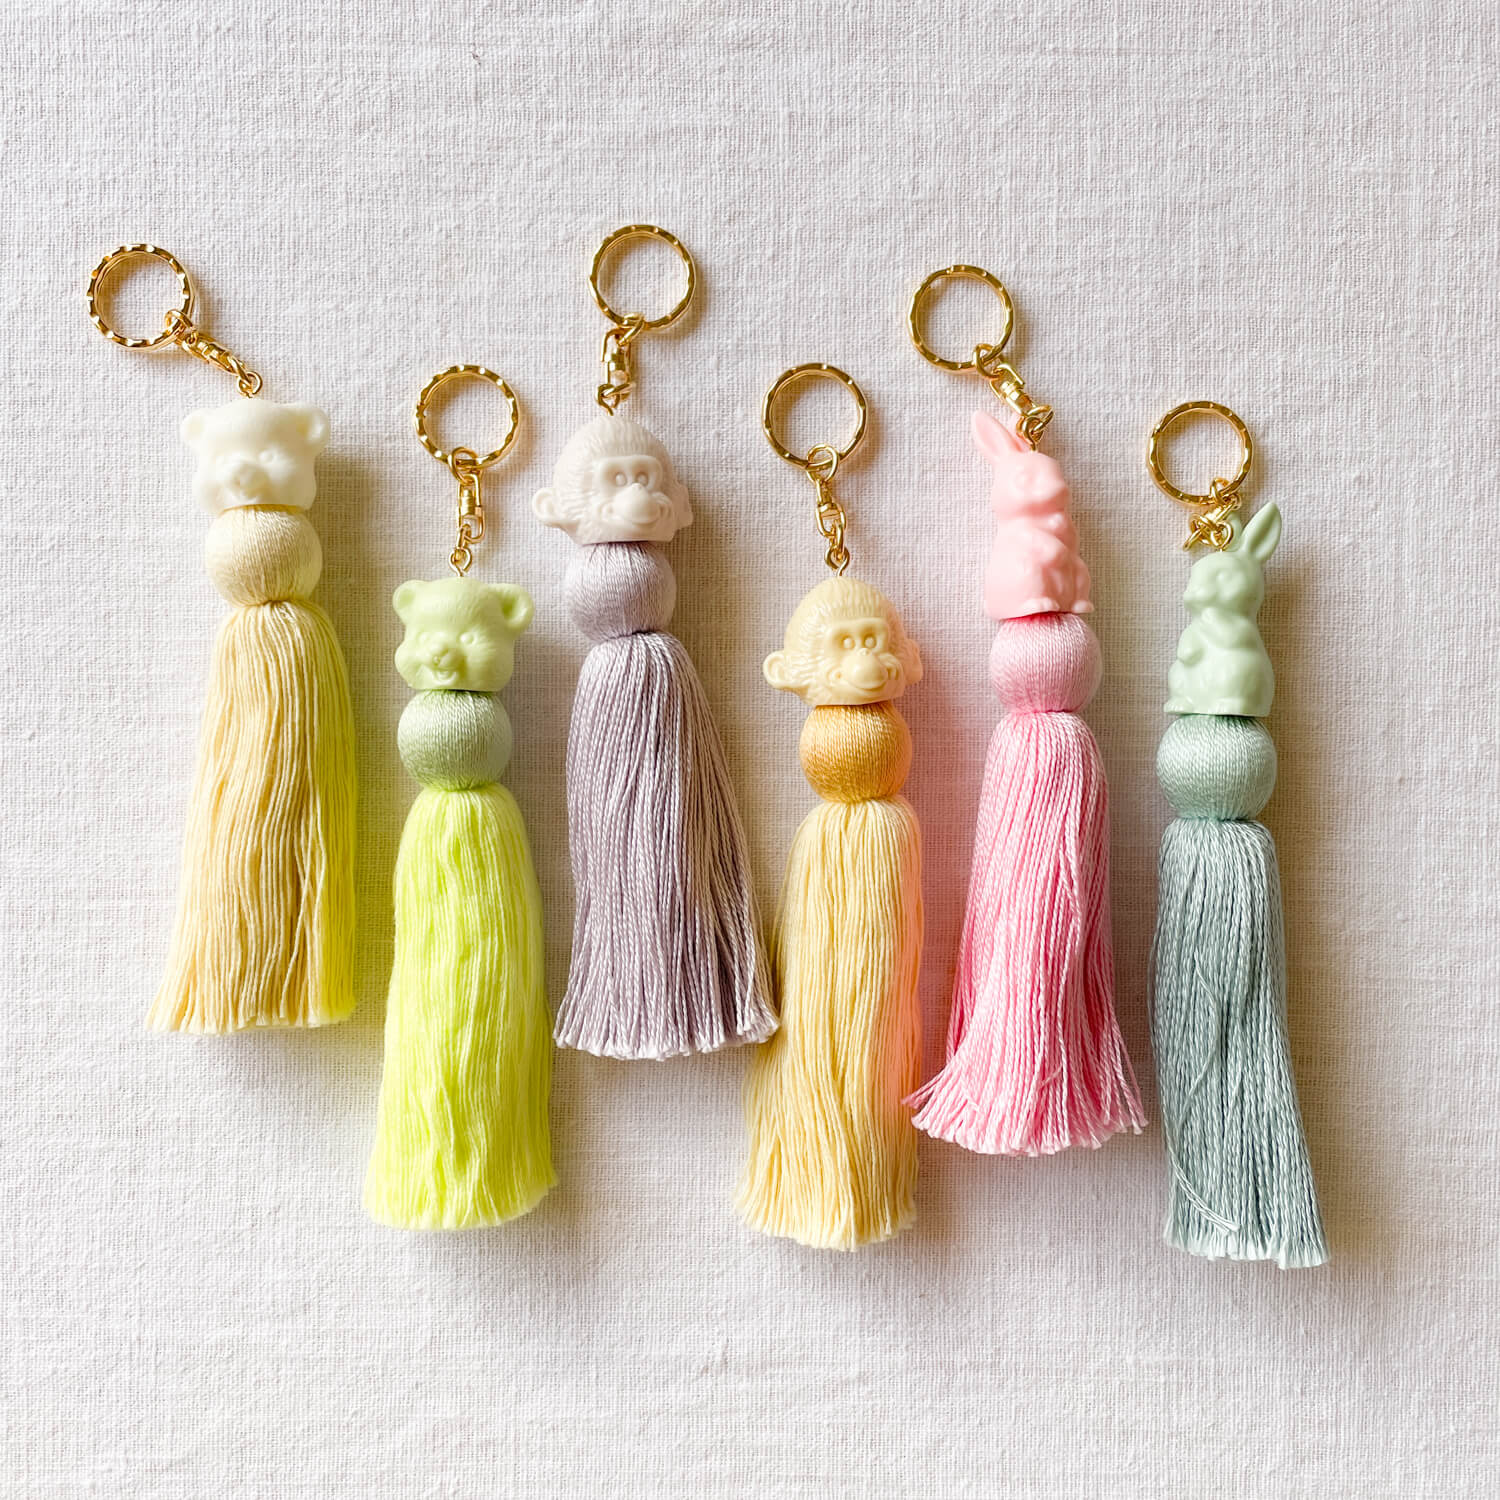 5 Sets Tassel Key Chain Making Kit DIY Suede Charms Gold Key Rings  Keychains